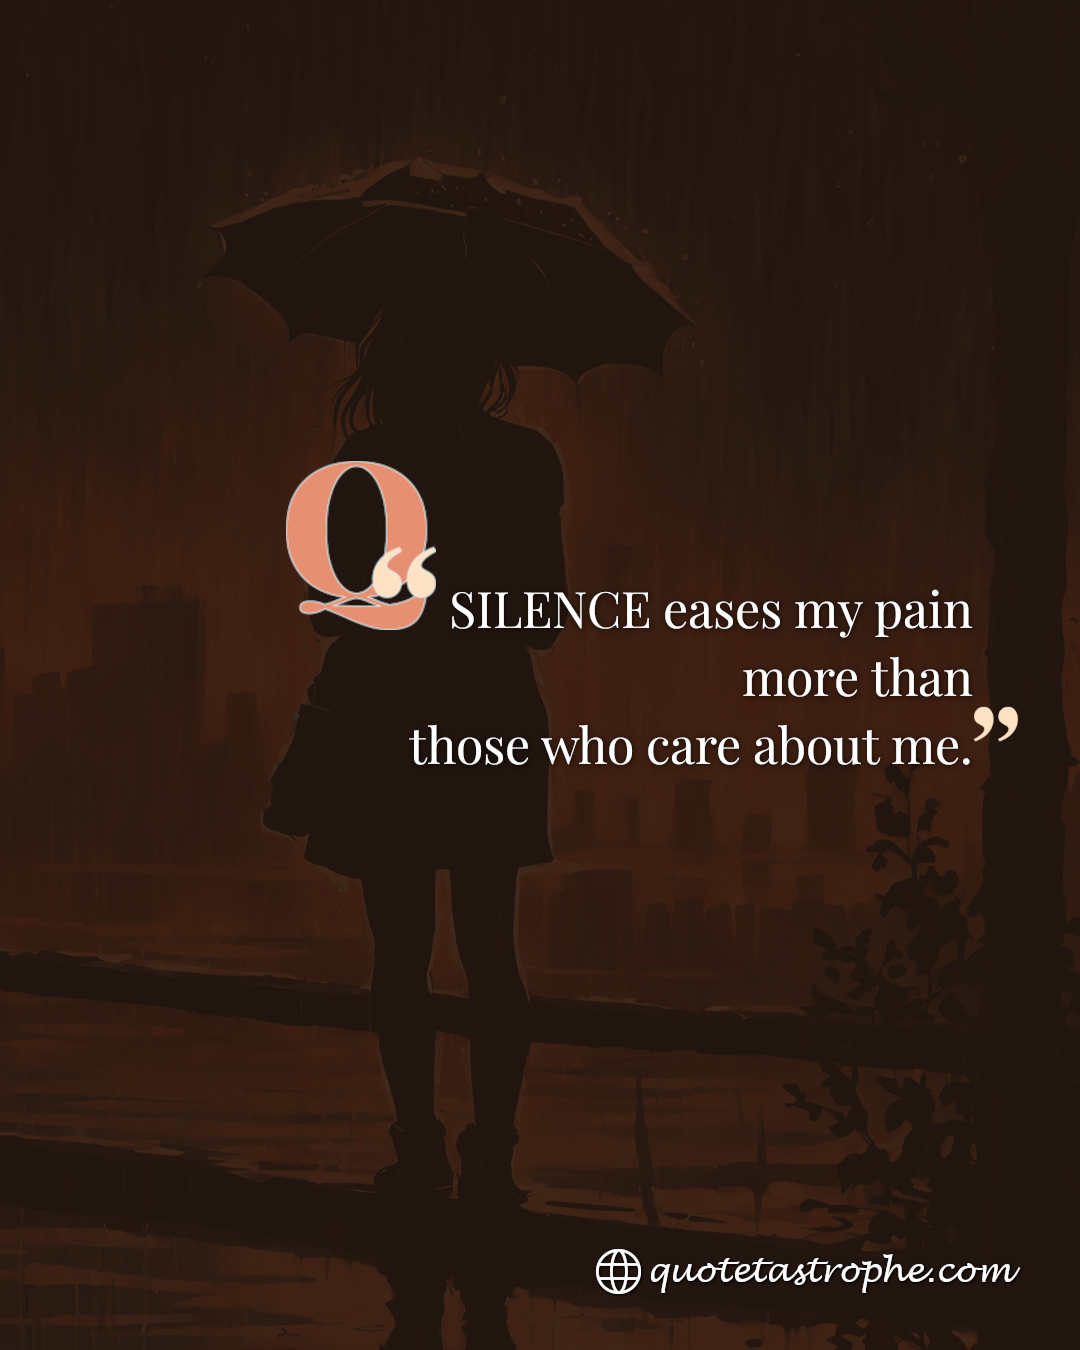 Silence Eases My Pain More Than Those Who Care About Me